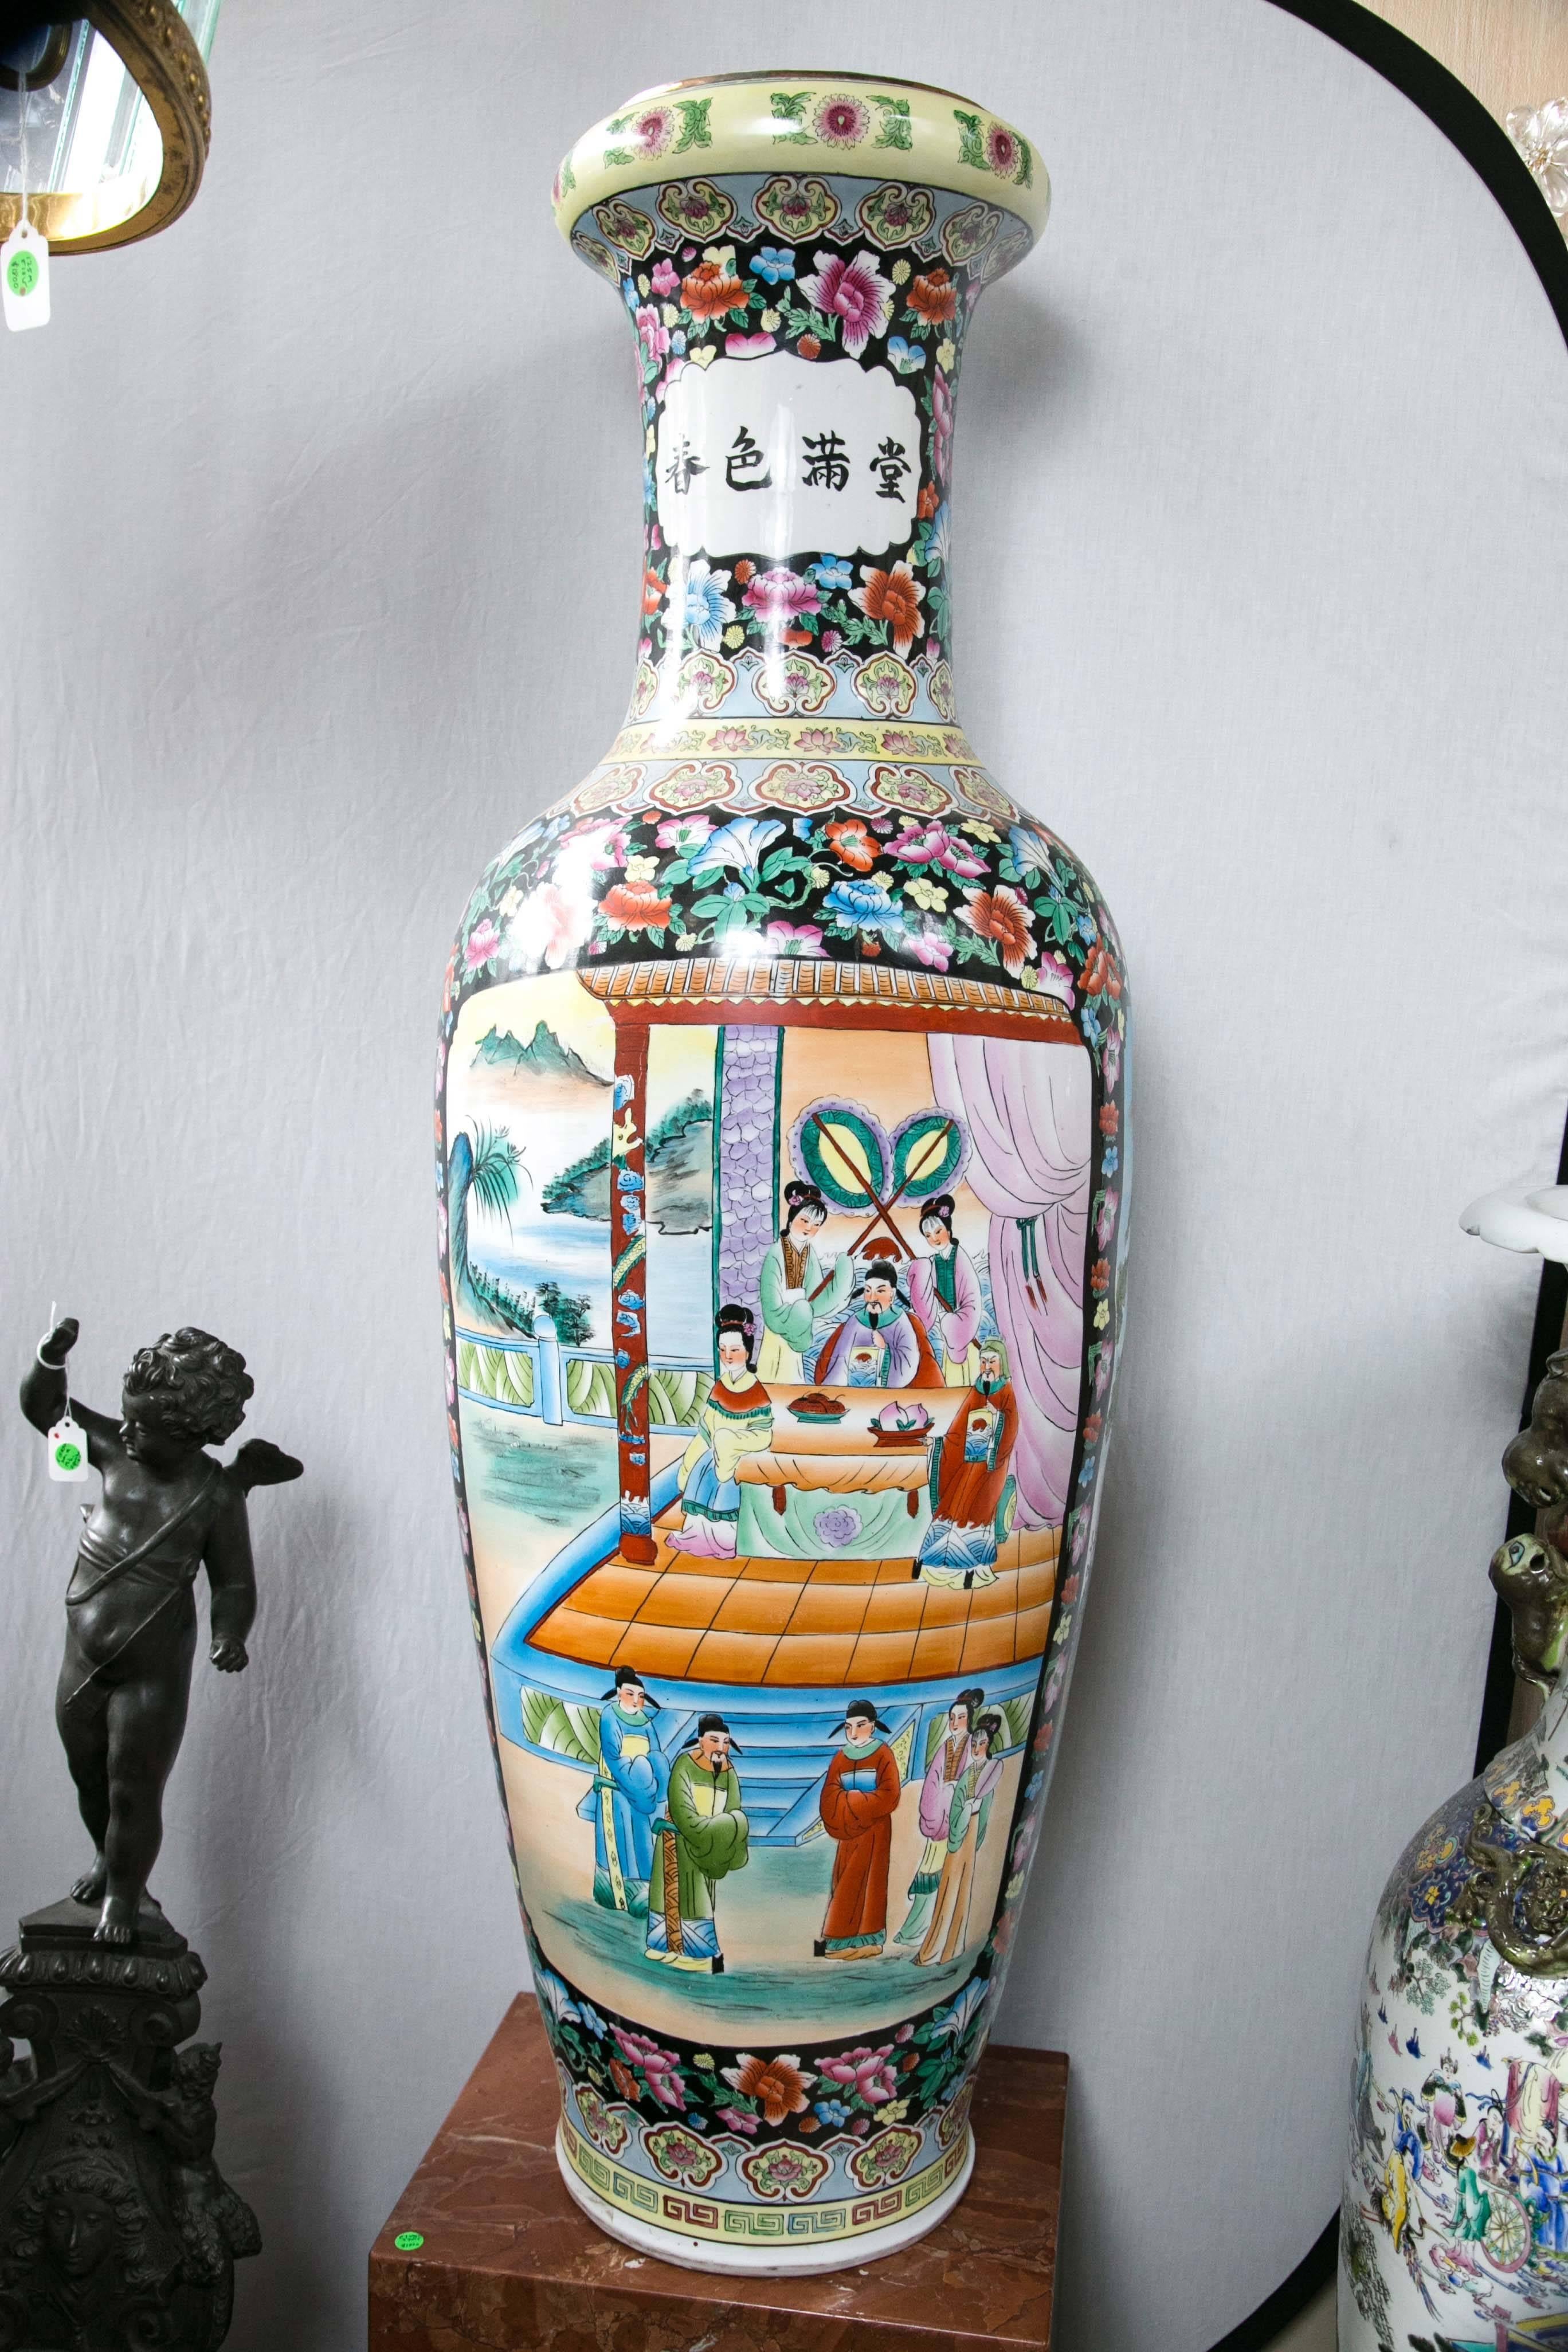 This pair have a Famille noire ground decorated with floral motifs. Each has two panels of painted figures in court settings.
Chinese calligraphy decorates the necks.